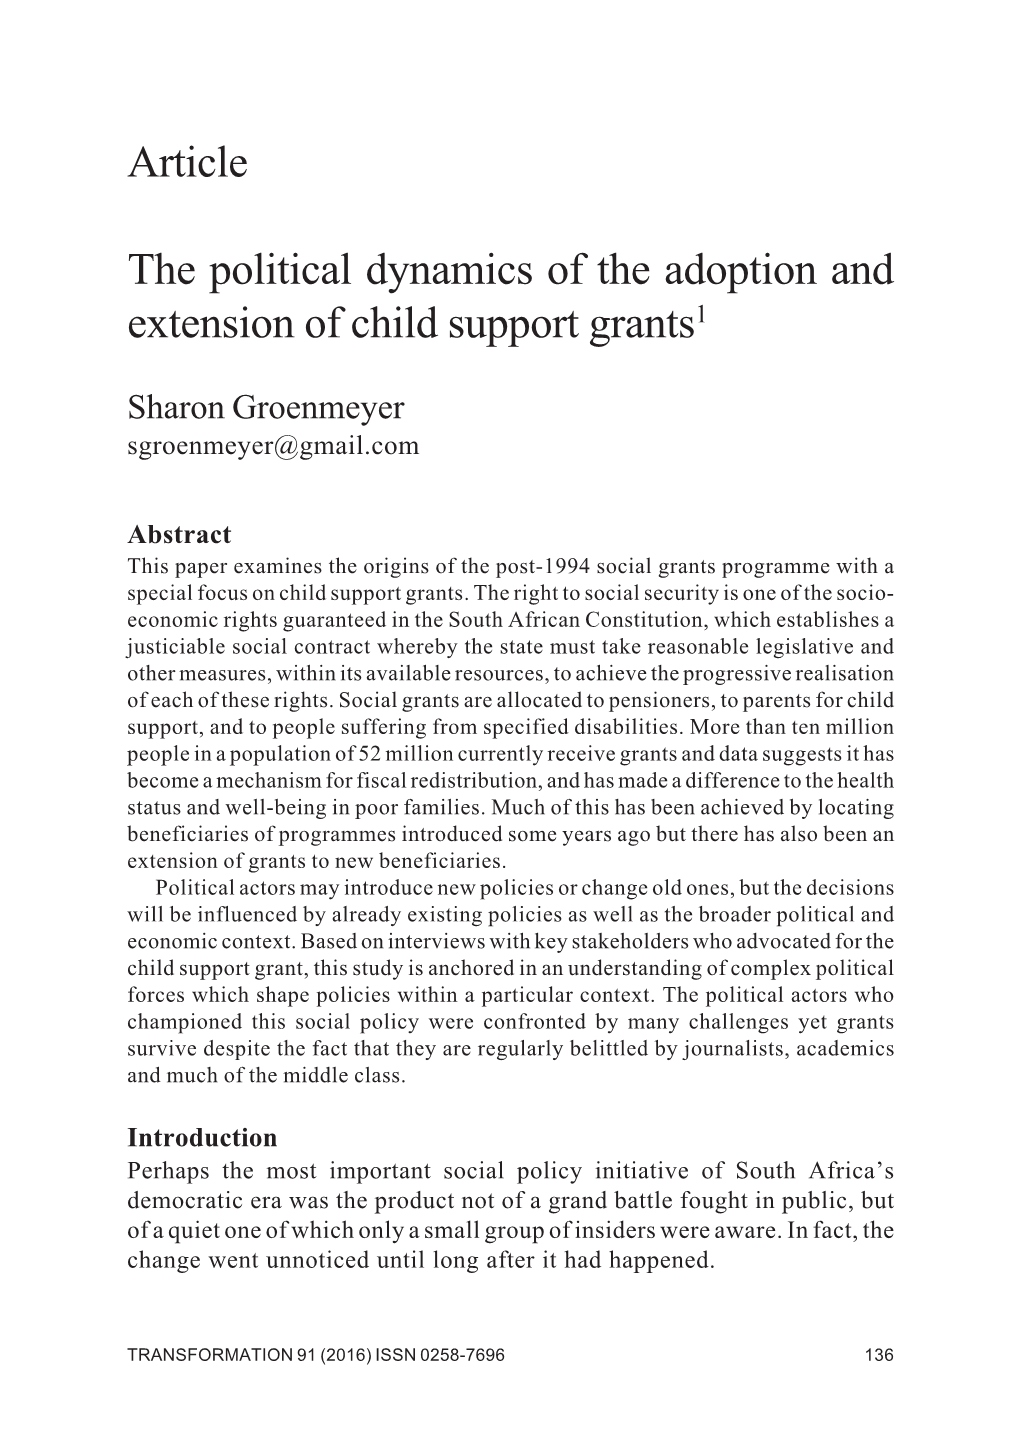 The Political Dynamics of the Adoption and Extension of Child Support Grants1